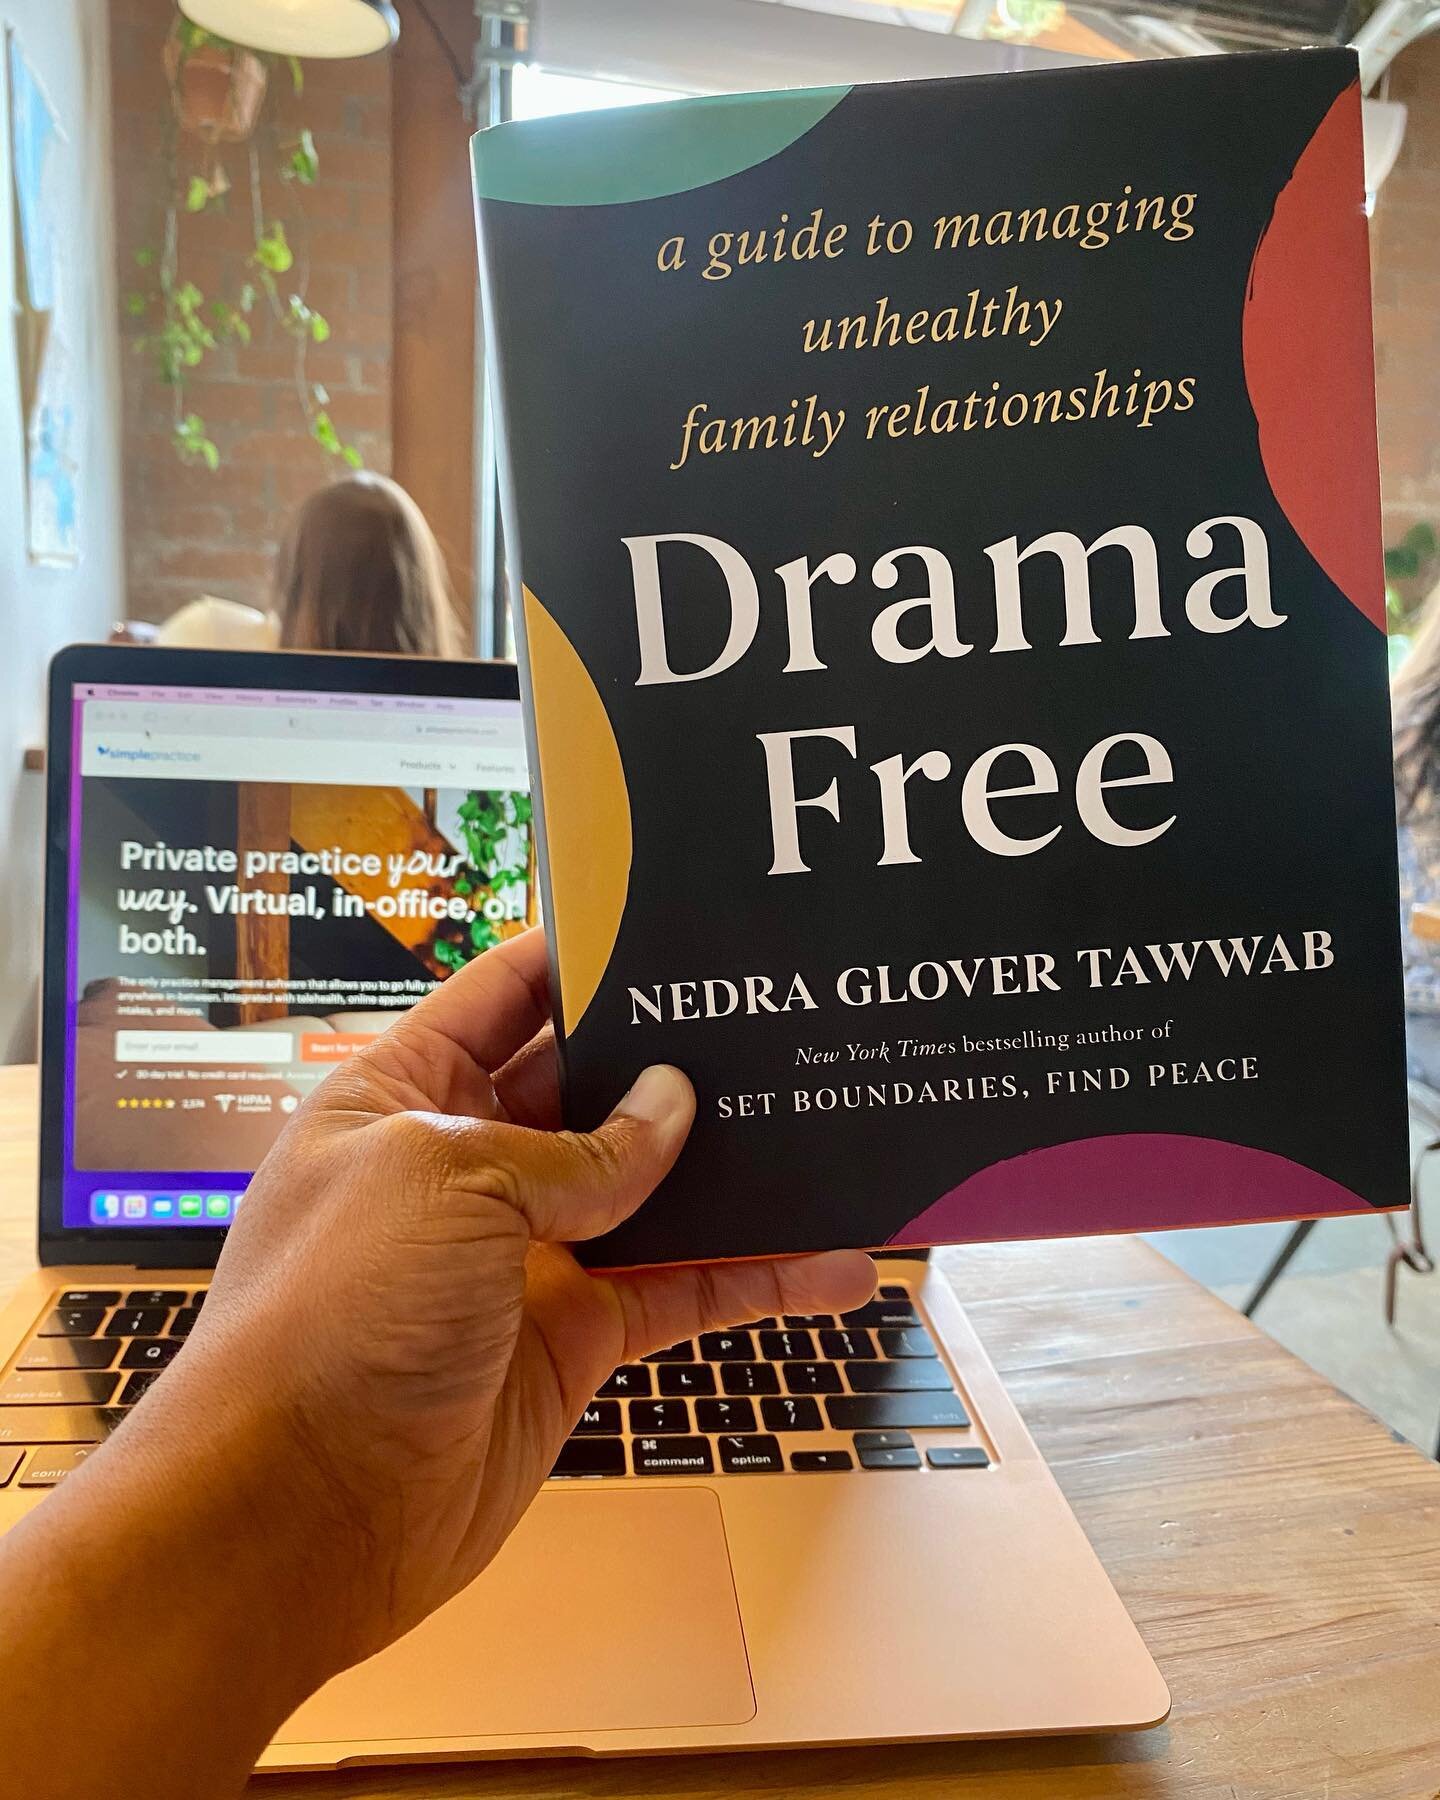 P R O U D  M O M E N T !
My friend has done it again! I&rsquo;m so excited @nedratawwab for your upcoming release of your latest book, Drama Free: A Guide to Managing Unhealthy Family Relationships!  Focusing on such an important topic as family dyna